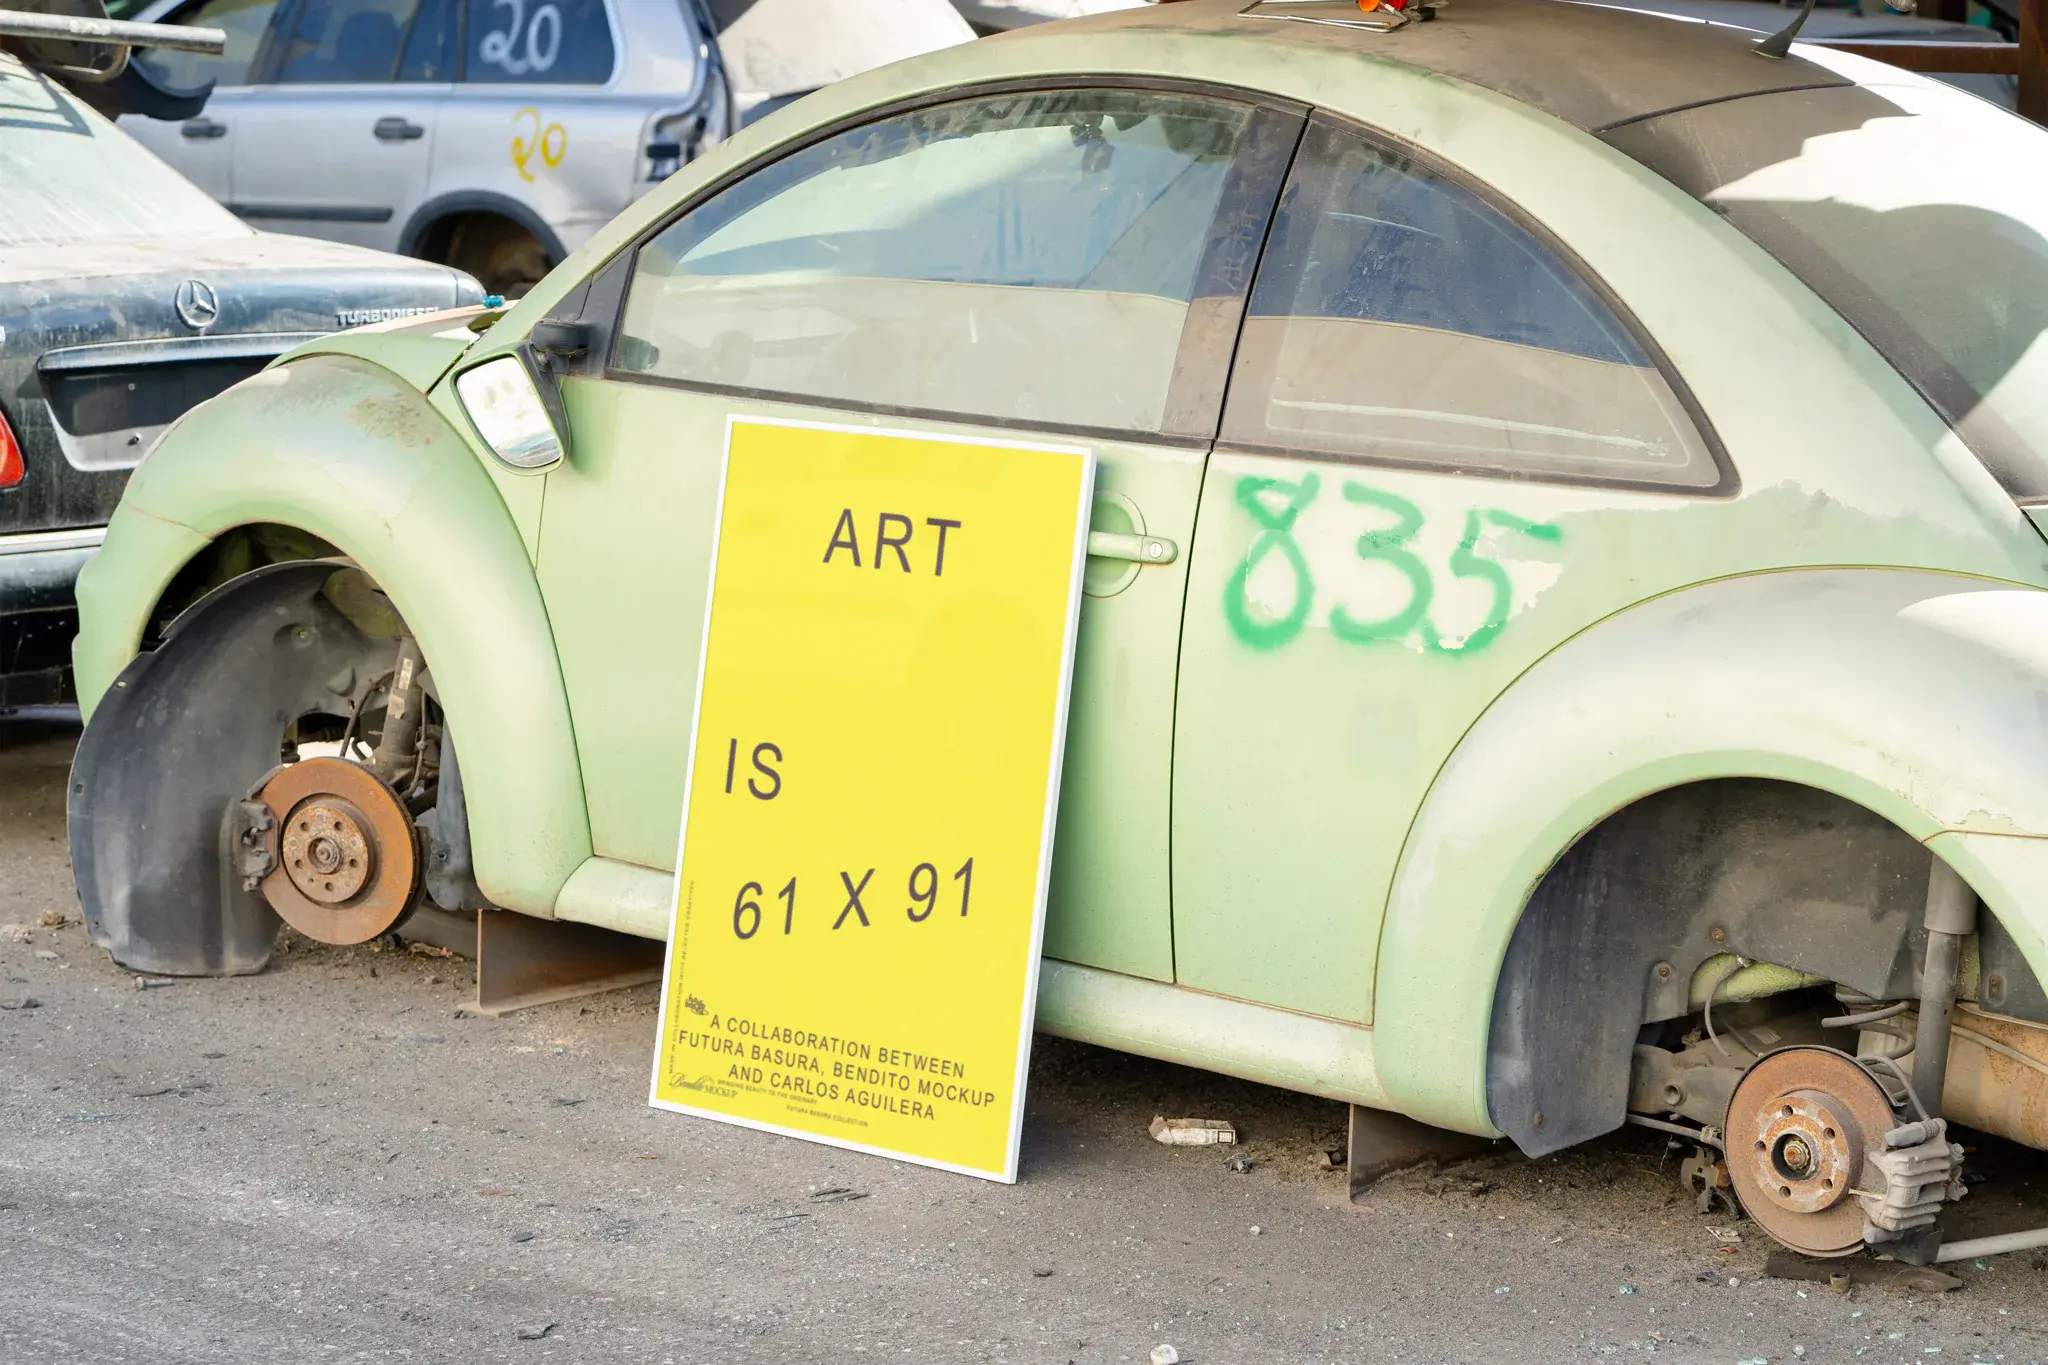 Framed poster mockup next to a green beetle car in a car scrapping